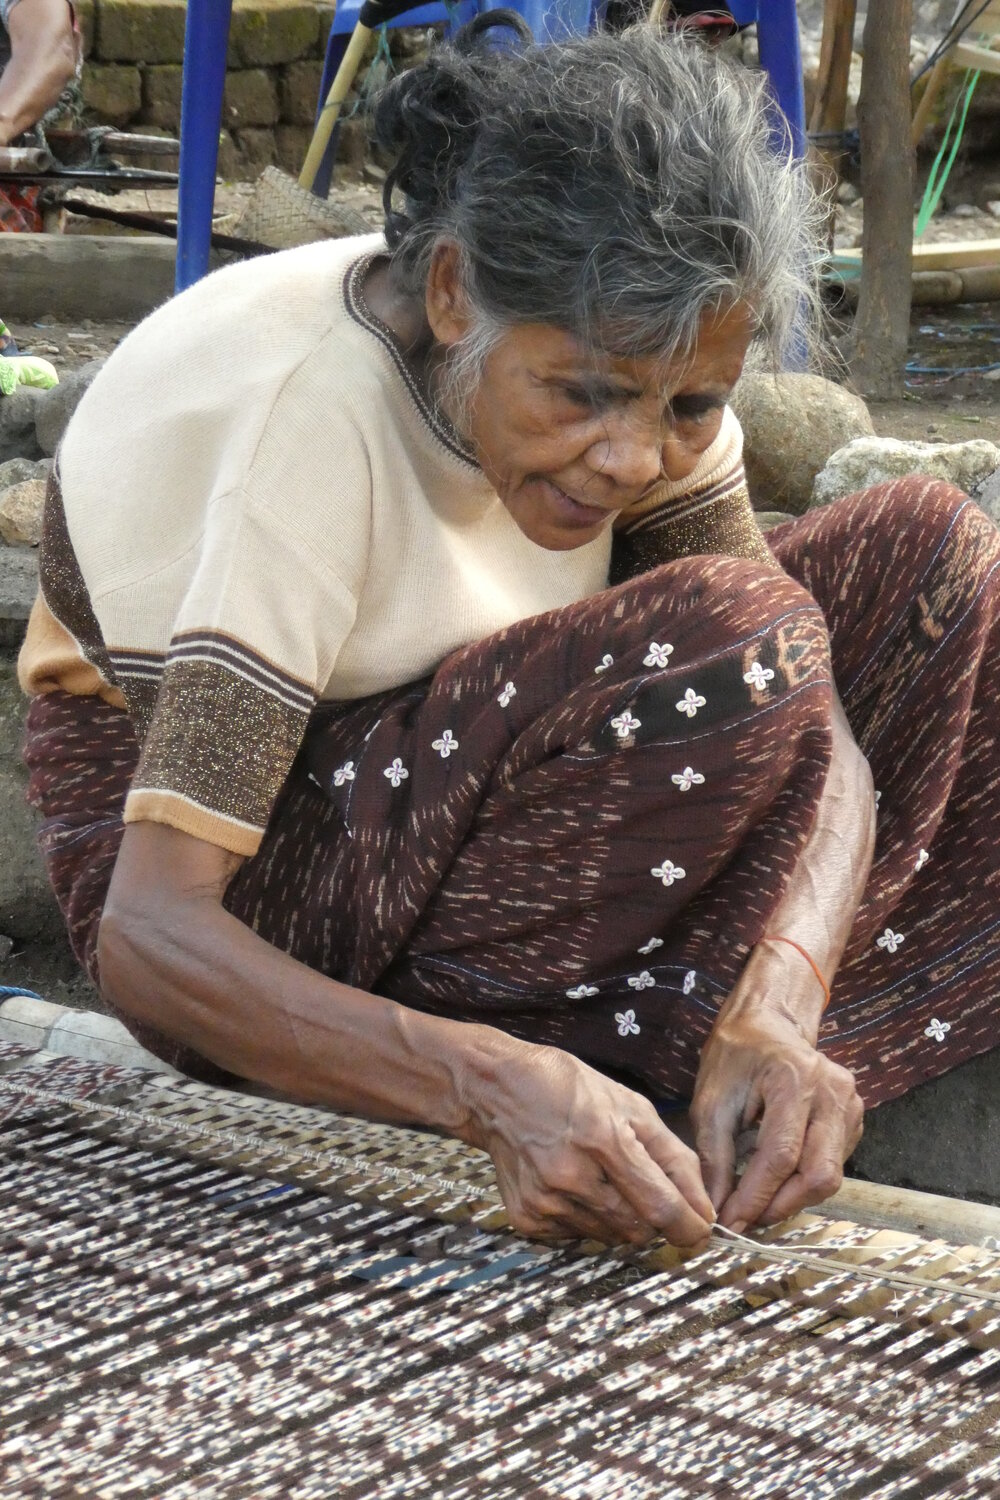 Alighning a loom with warp tied and dyed threads before weaving.JPG